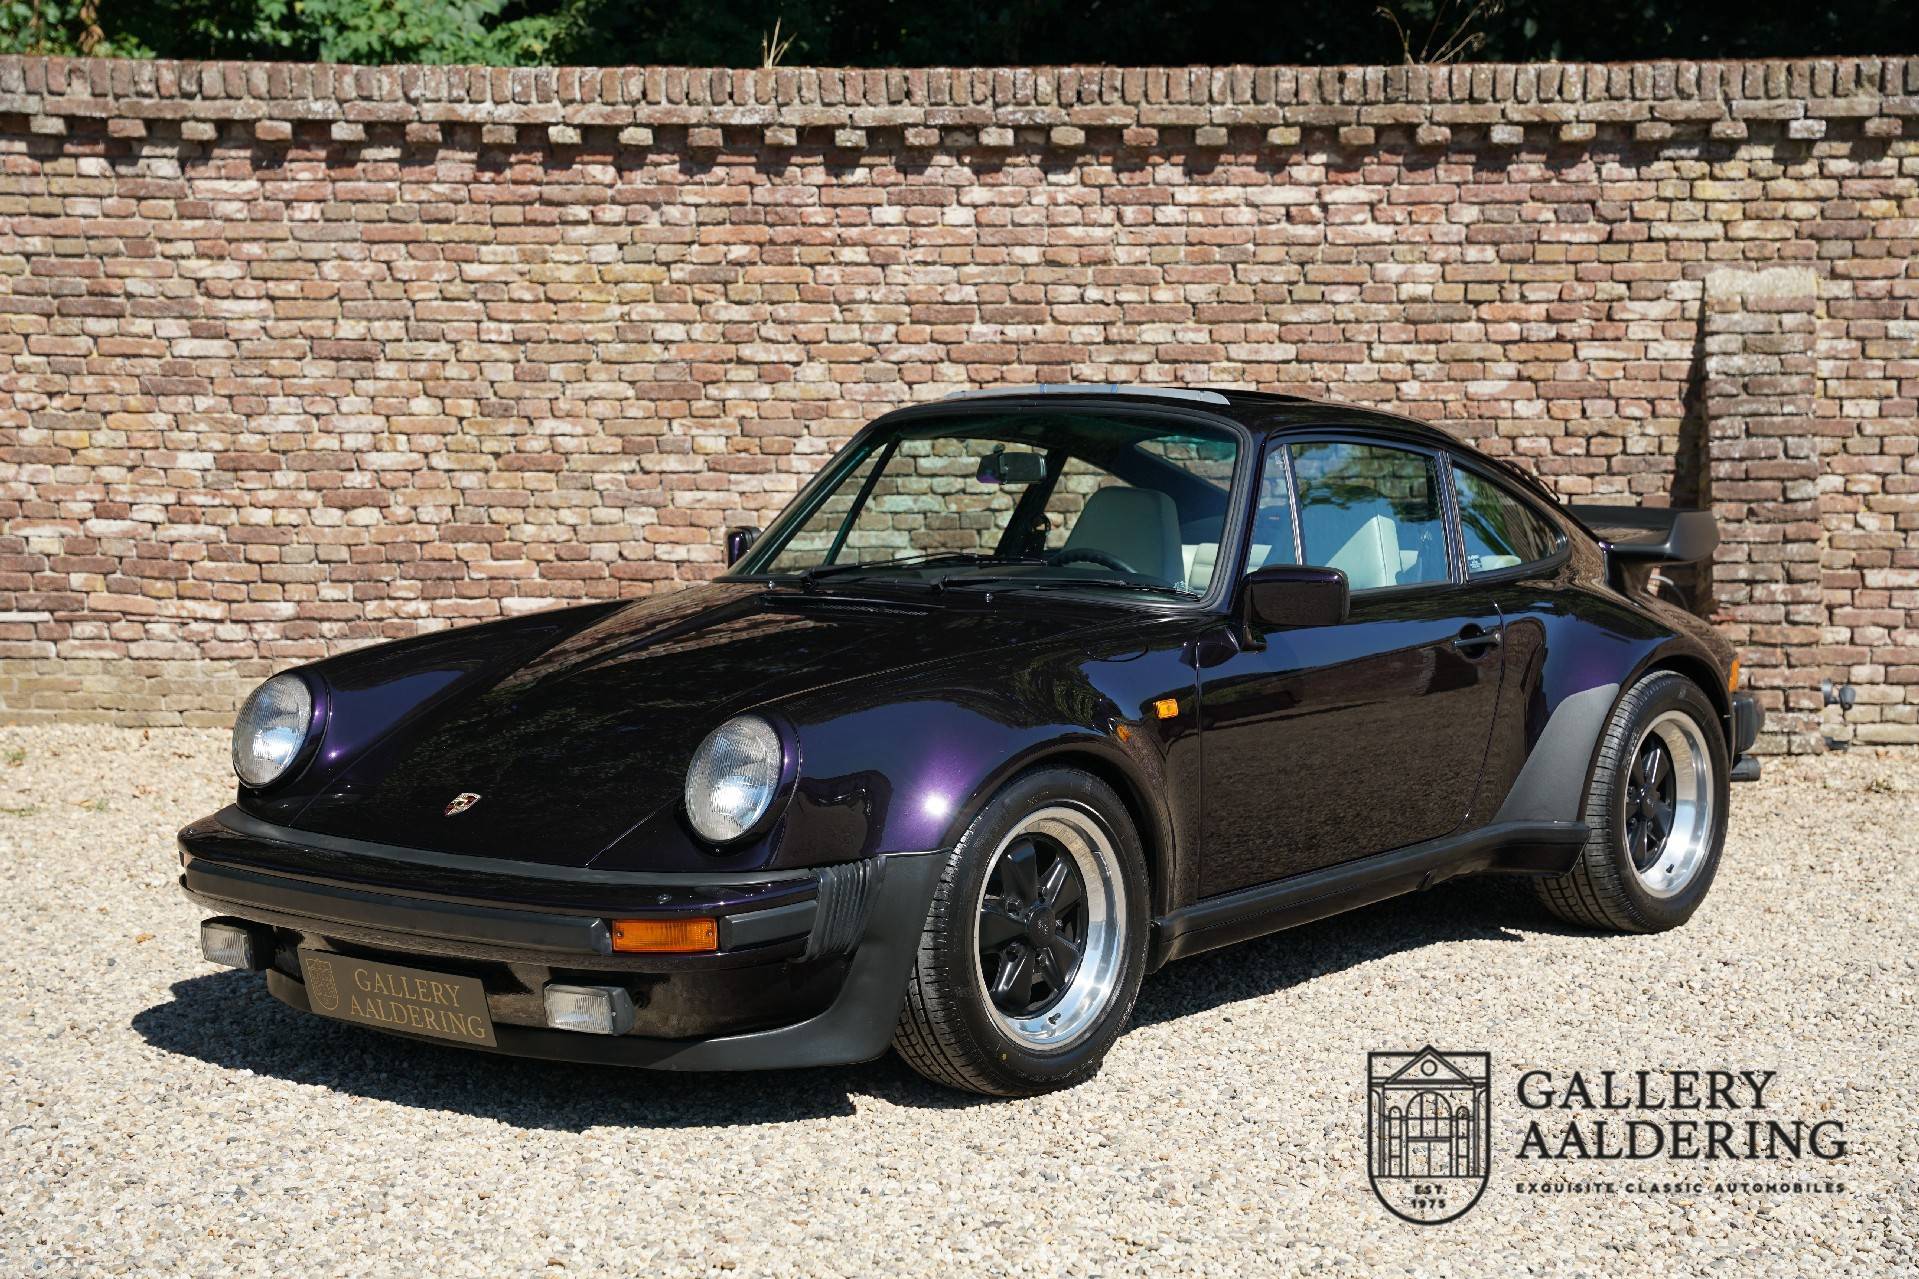 For Sale: Porsche 911 Turbo  (1980) offered for GBP 123,805